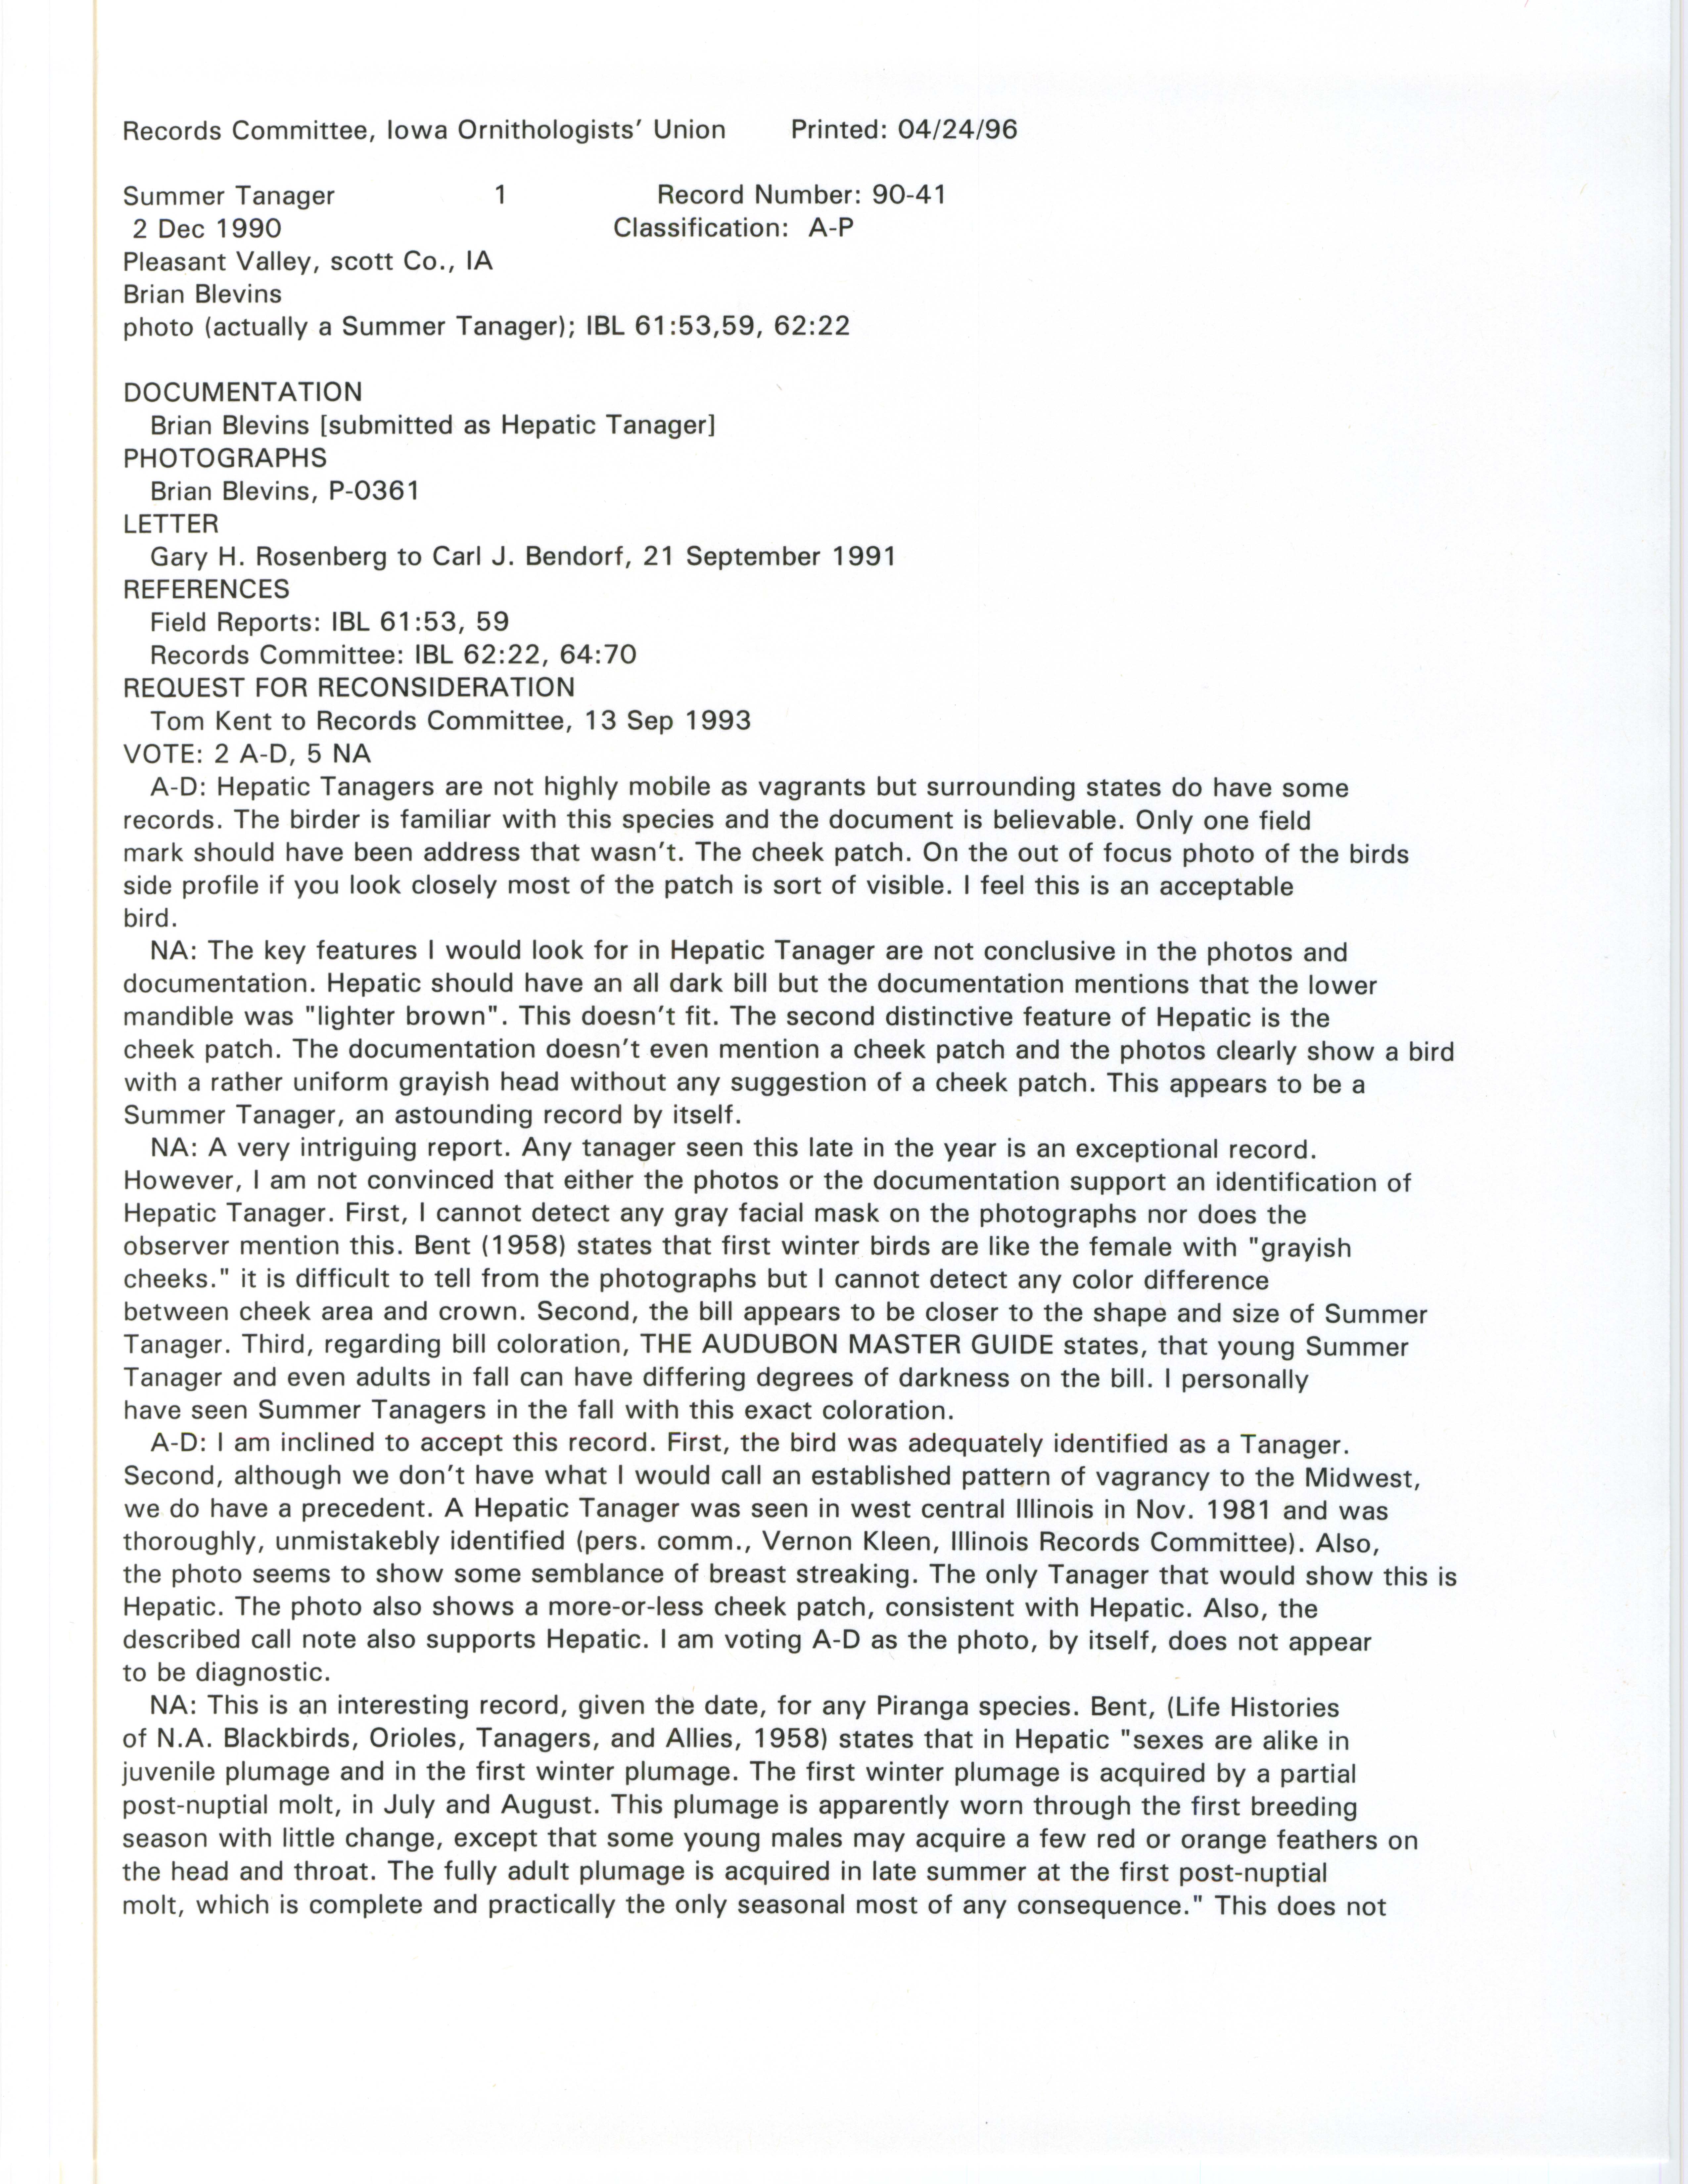 Records Committee review for rare bird sighting for Summer Tanager at Pleasant Valley, 1990